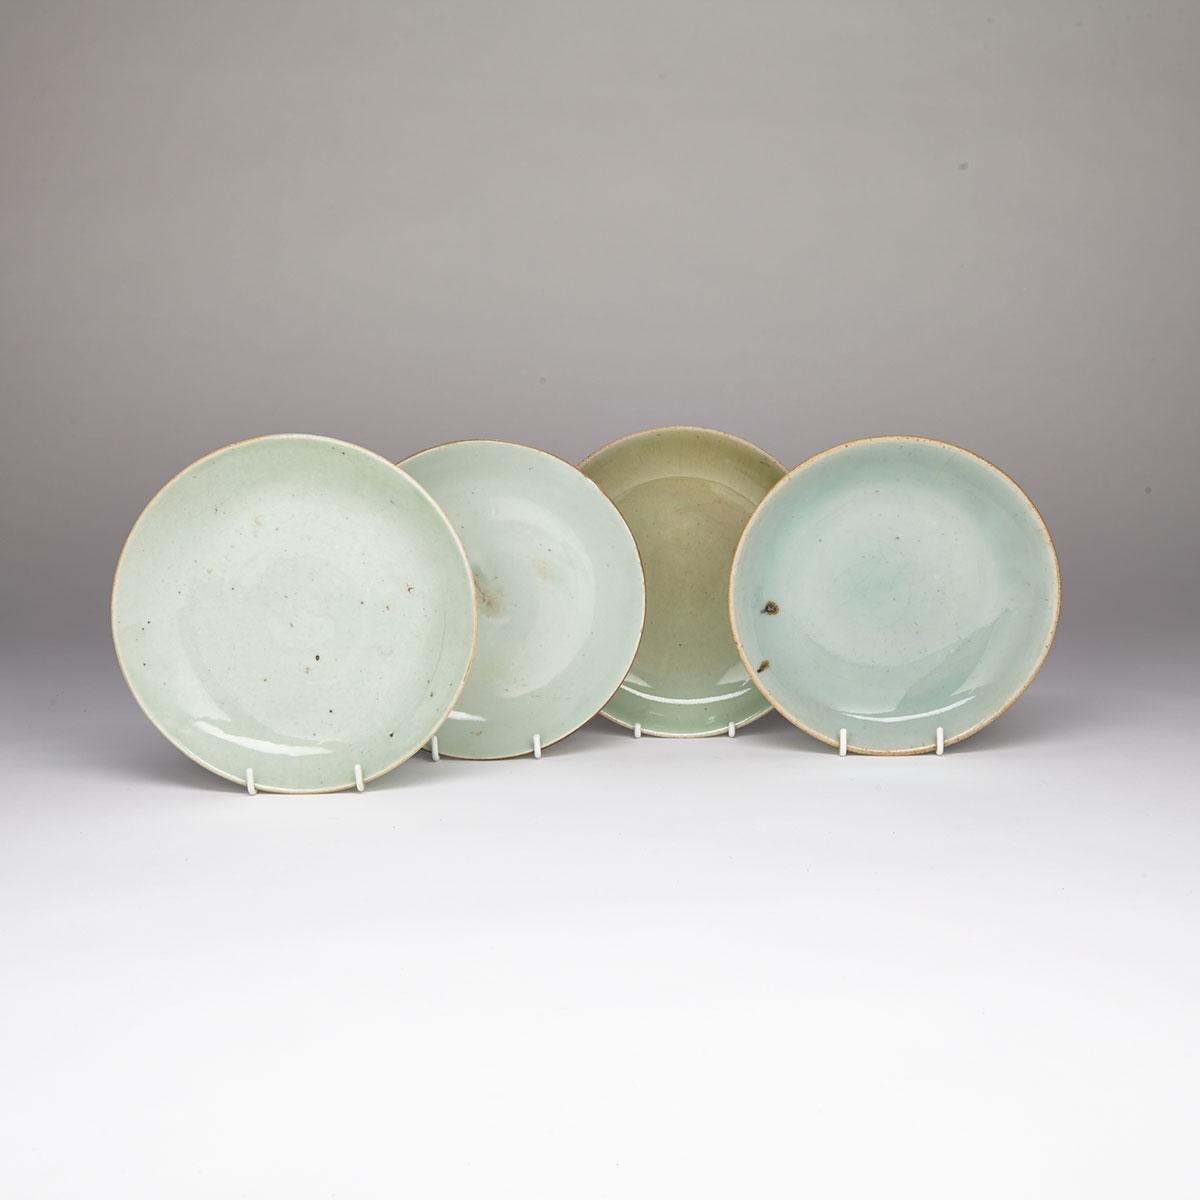 Eleven Blue and White Dishes, Chinese and South East Asia, 16th to 19th Century